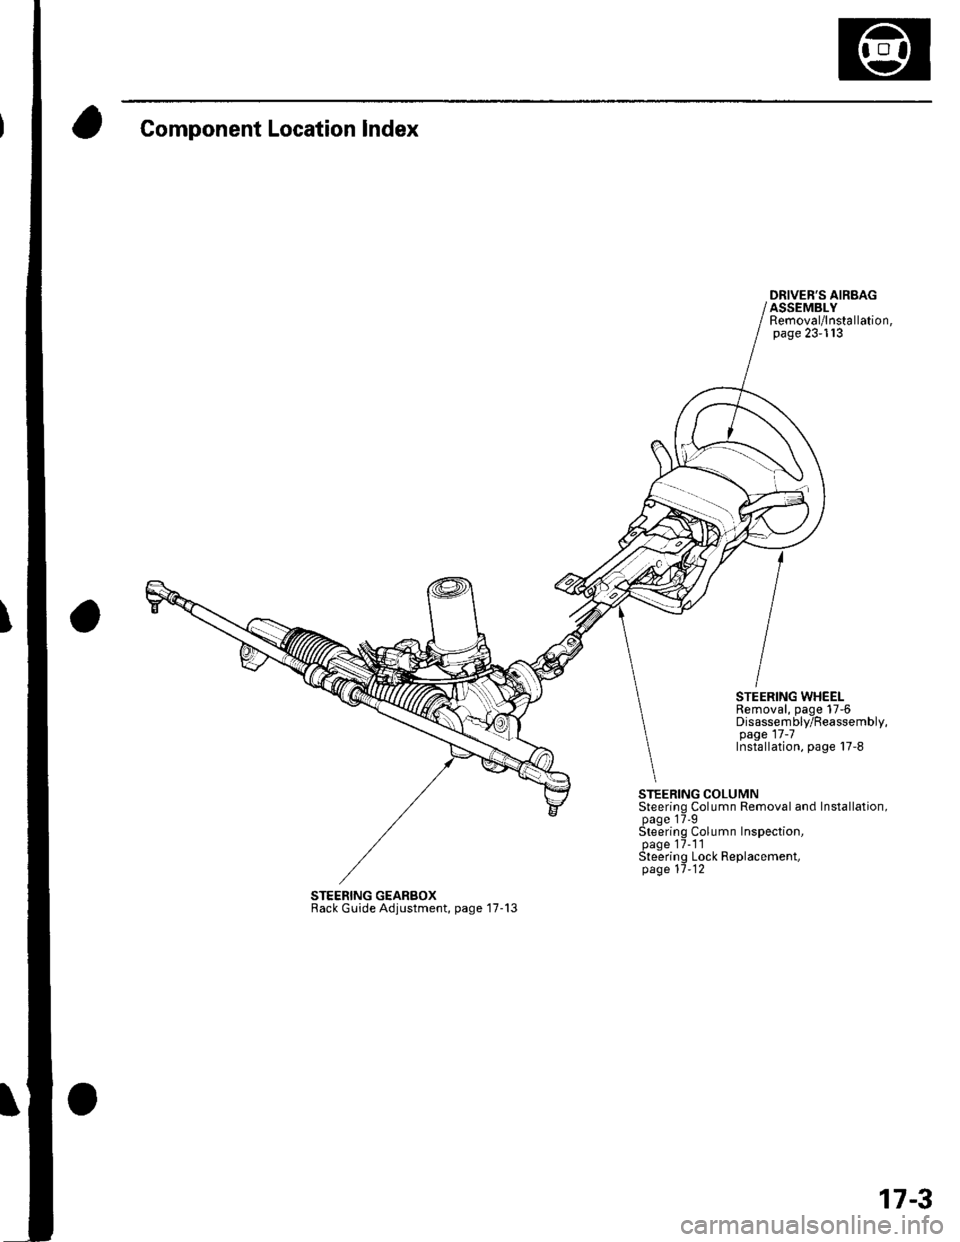 HONDA CIVIC 2003 7.G Workshop Manual Component Location Index
DRIVERS AIRBAGASSEMBLYRemoval/lnstallation,page 23-113
STEERING WHEELRemoval, page 17-6Disassembly/Reassembly,page 17 -7Installation, page 17-8
STEERING COLUMNSteering Column